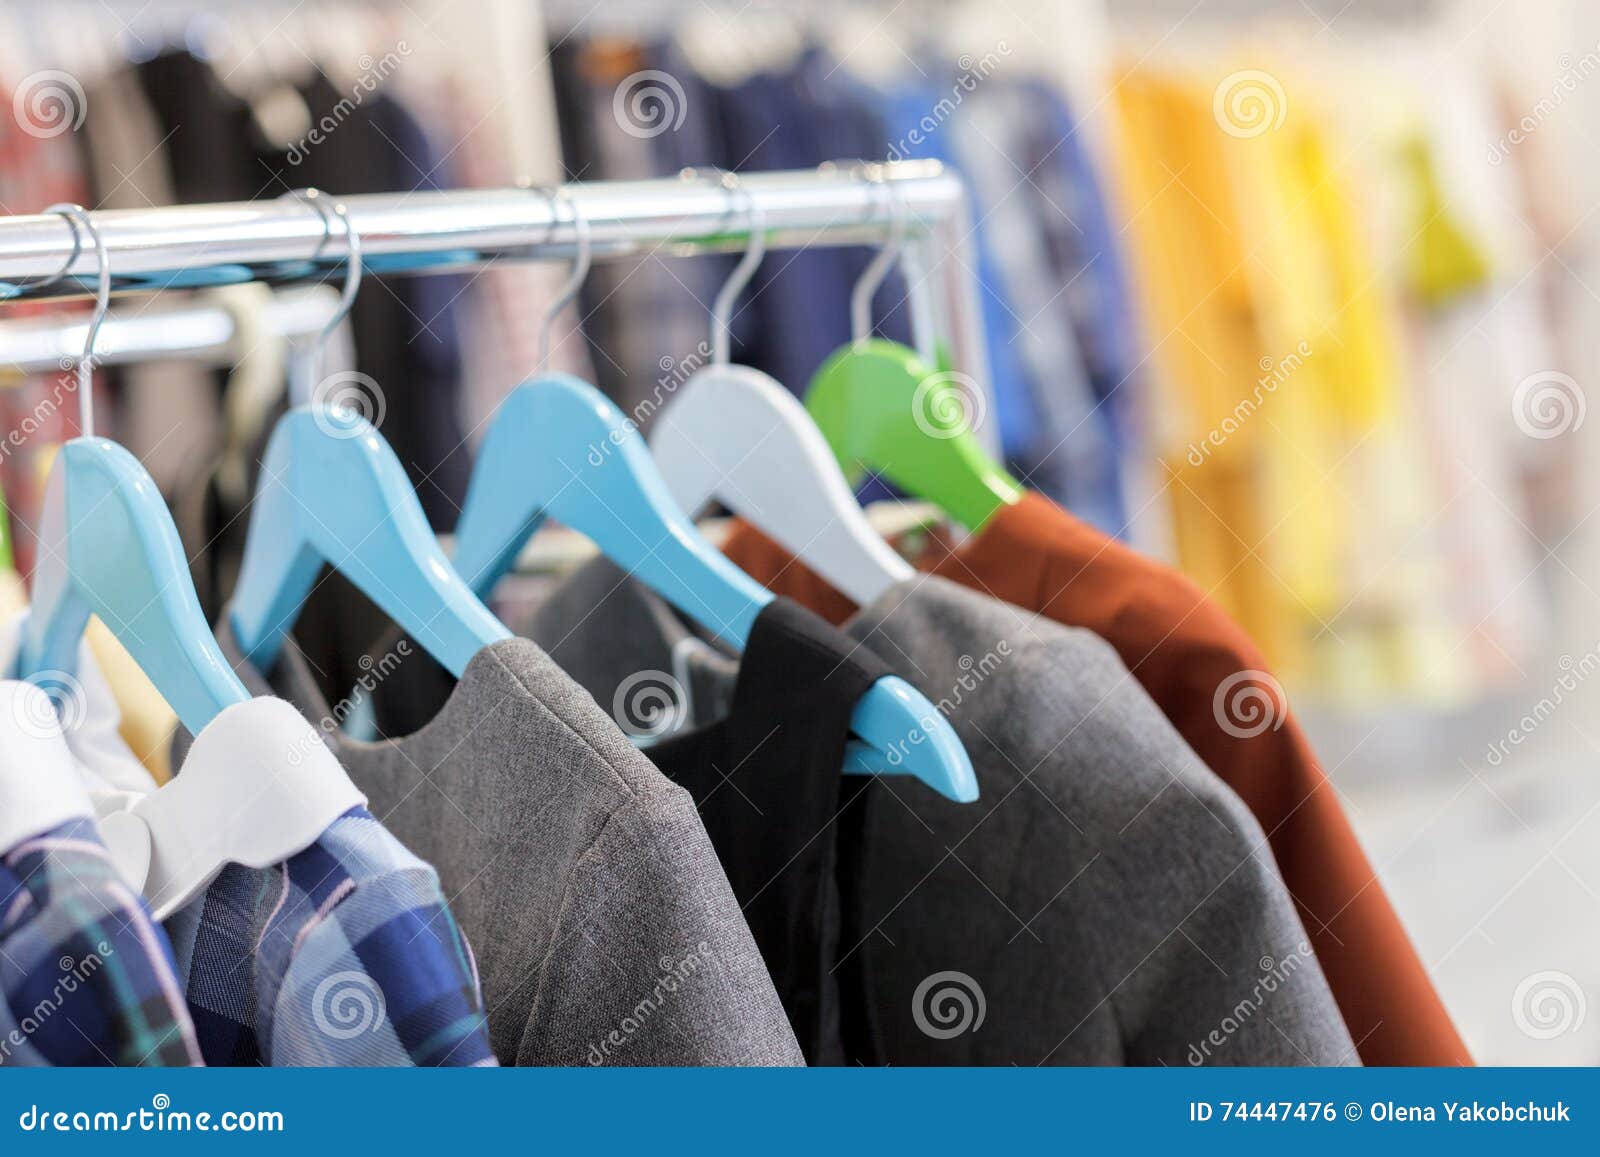 Modern Dresses on Hangers in Shop Stock Photo - Image of apparel ...